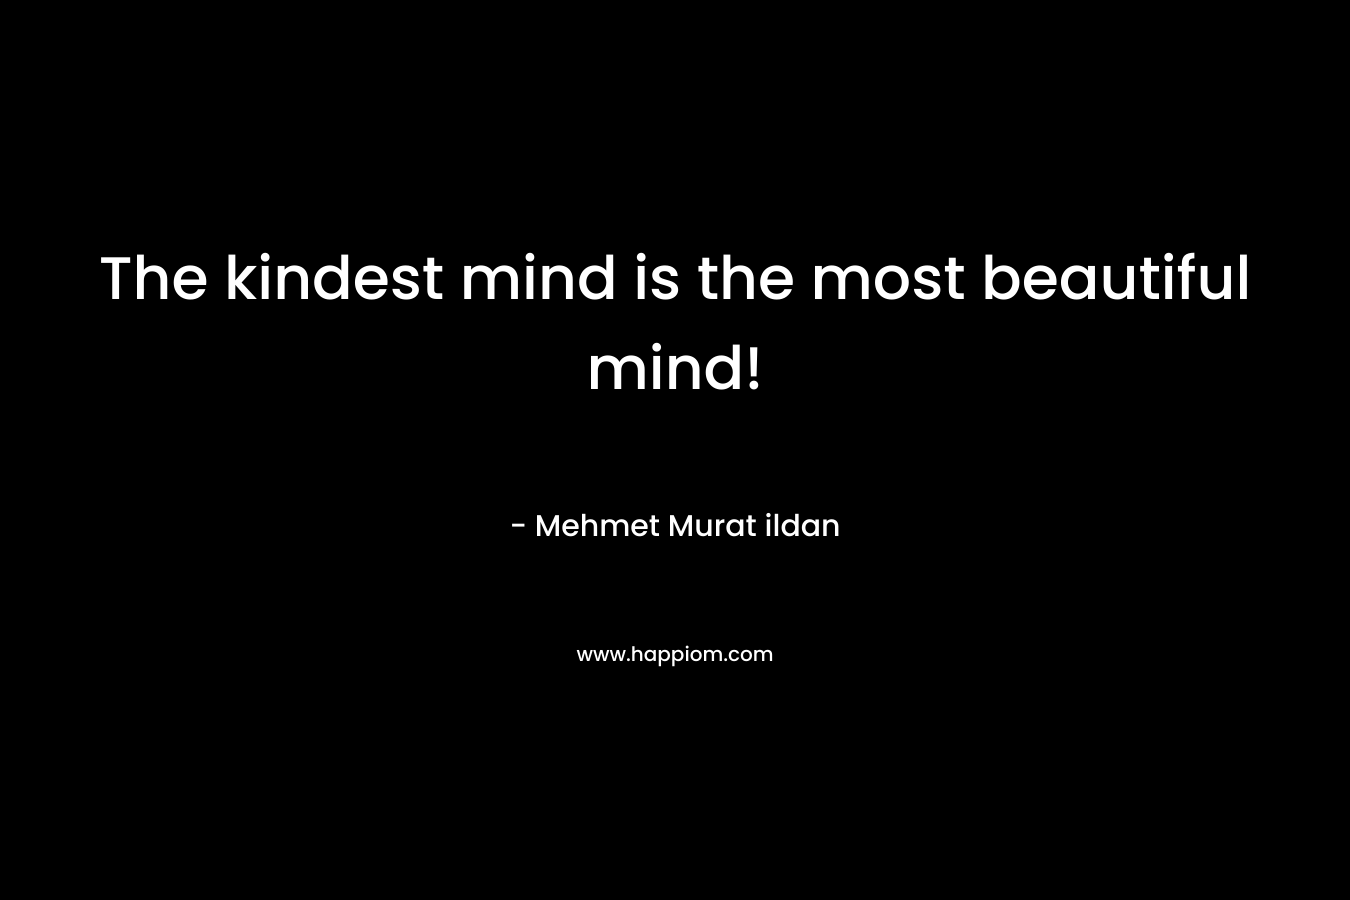 The kindest mind is the most beautiful mind!